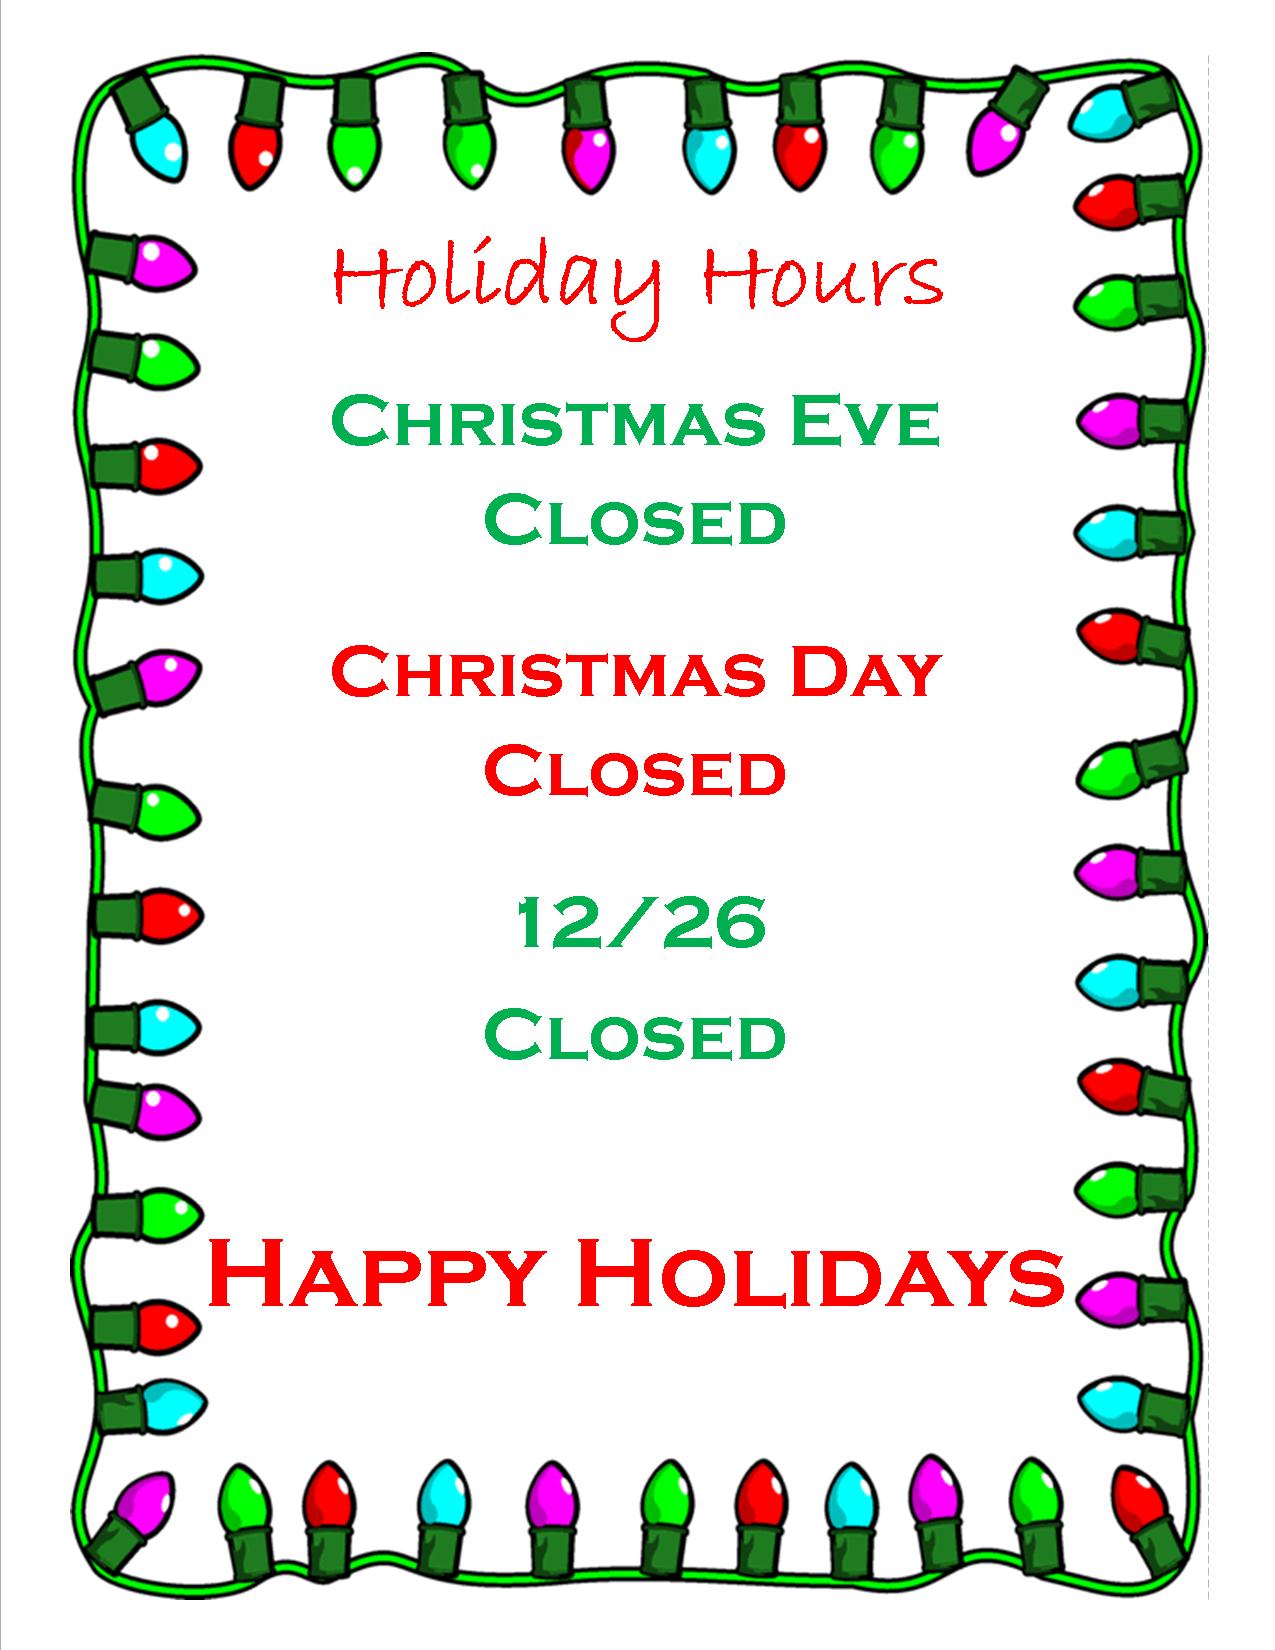 business-office-closed-for-holidays-keizer-fire-district-keizer-fire-district